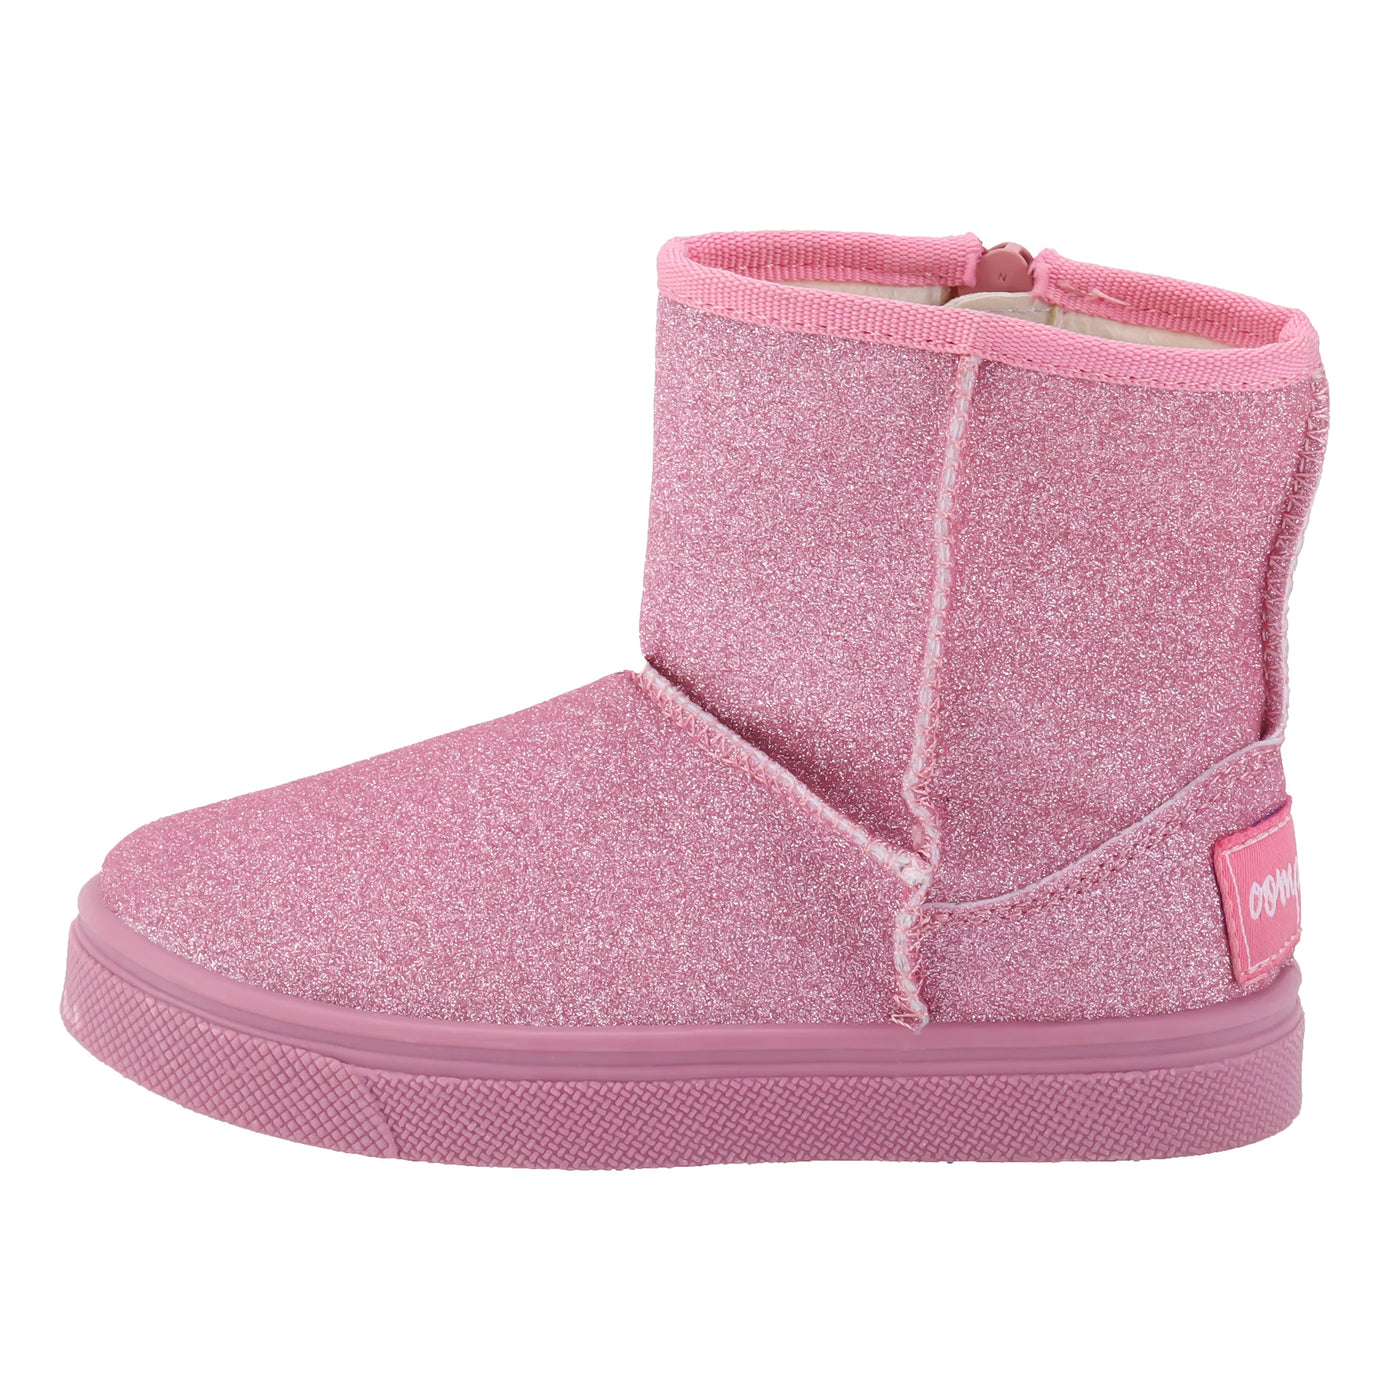 Frost Boot Pink Glitter by Oomphies